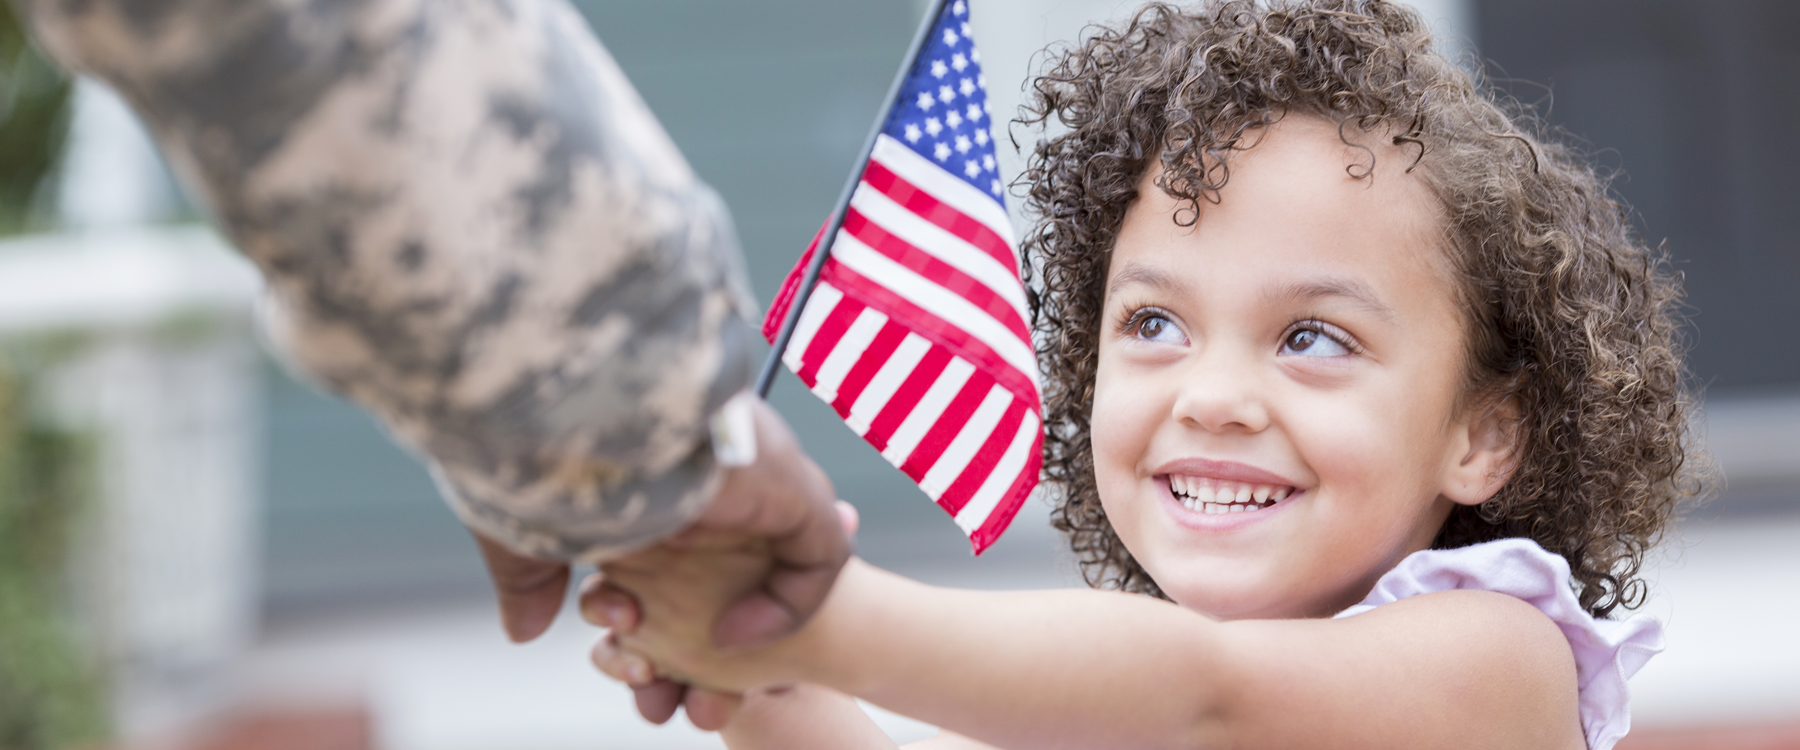 Image for What Matters to Military Families: Highlights from the 2019 Congressional Military Family Caucus Summit